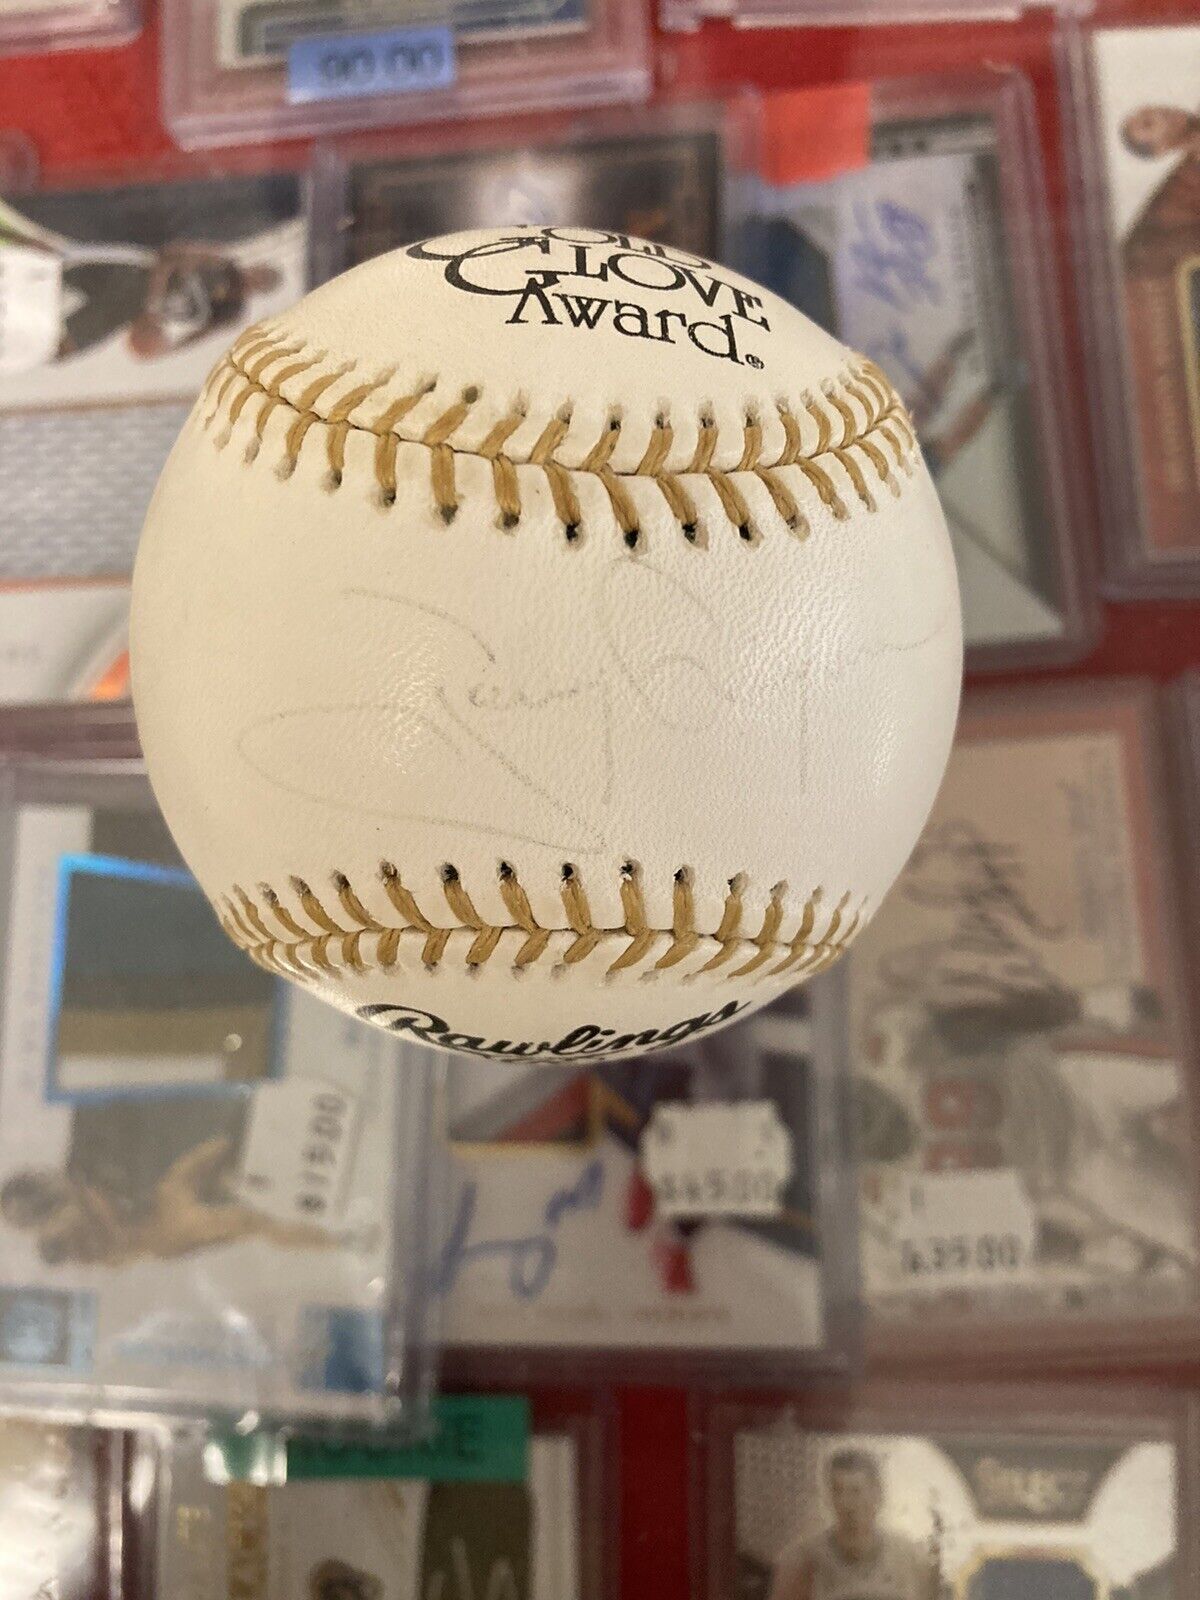 Tony Gwynn Signed Authentic Gold Glove Baseball PSA/DNA sticker only